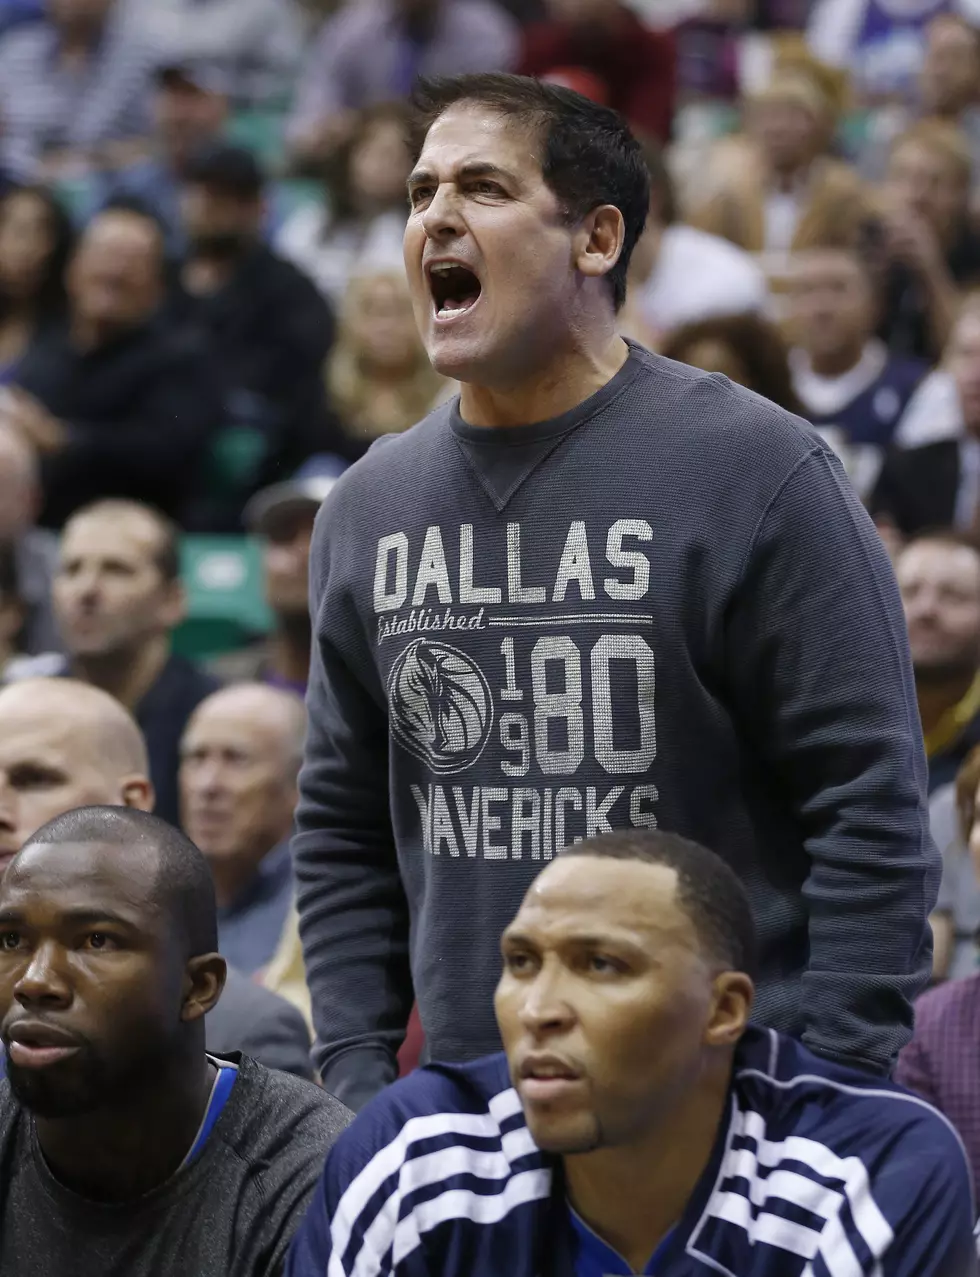 Mark Cuban Live Tweets While Passing a Kidney Stone